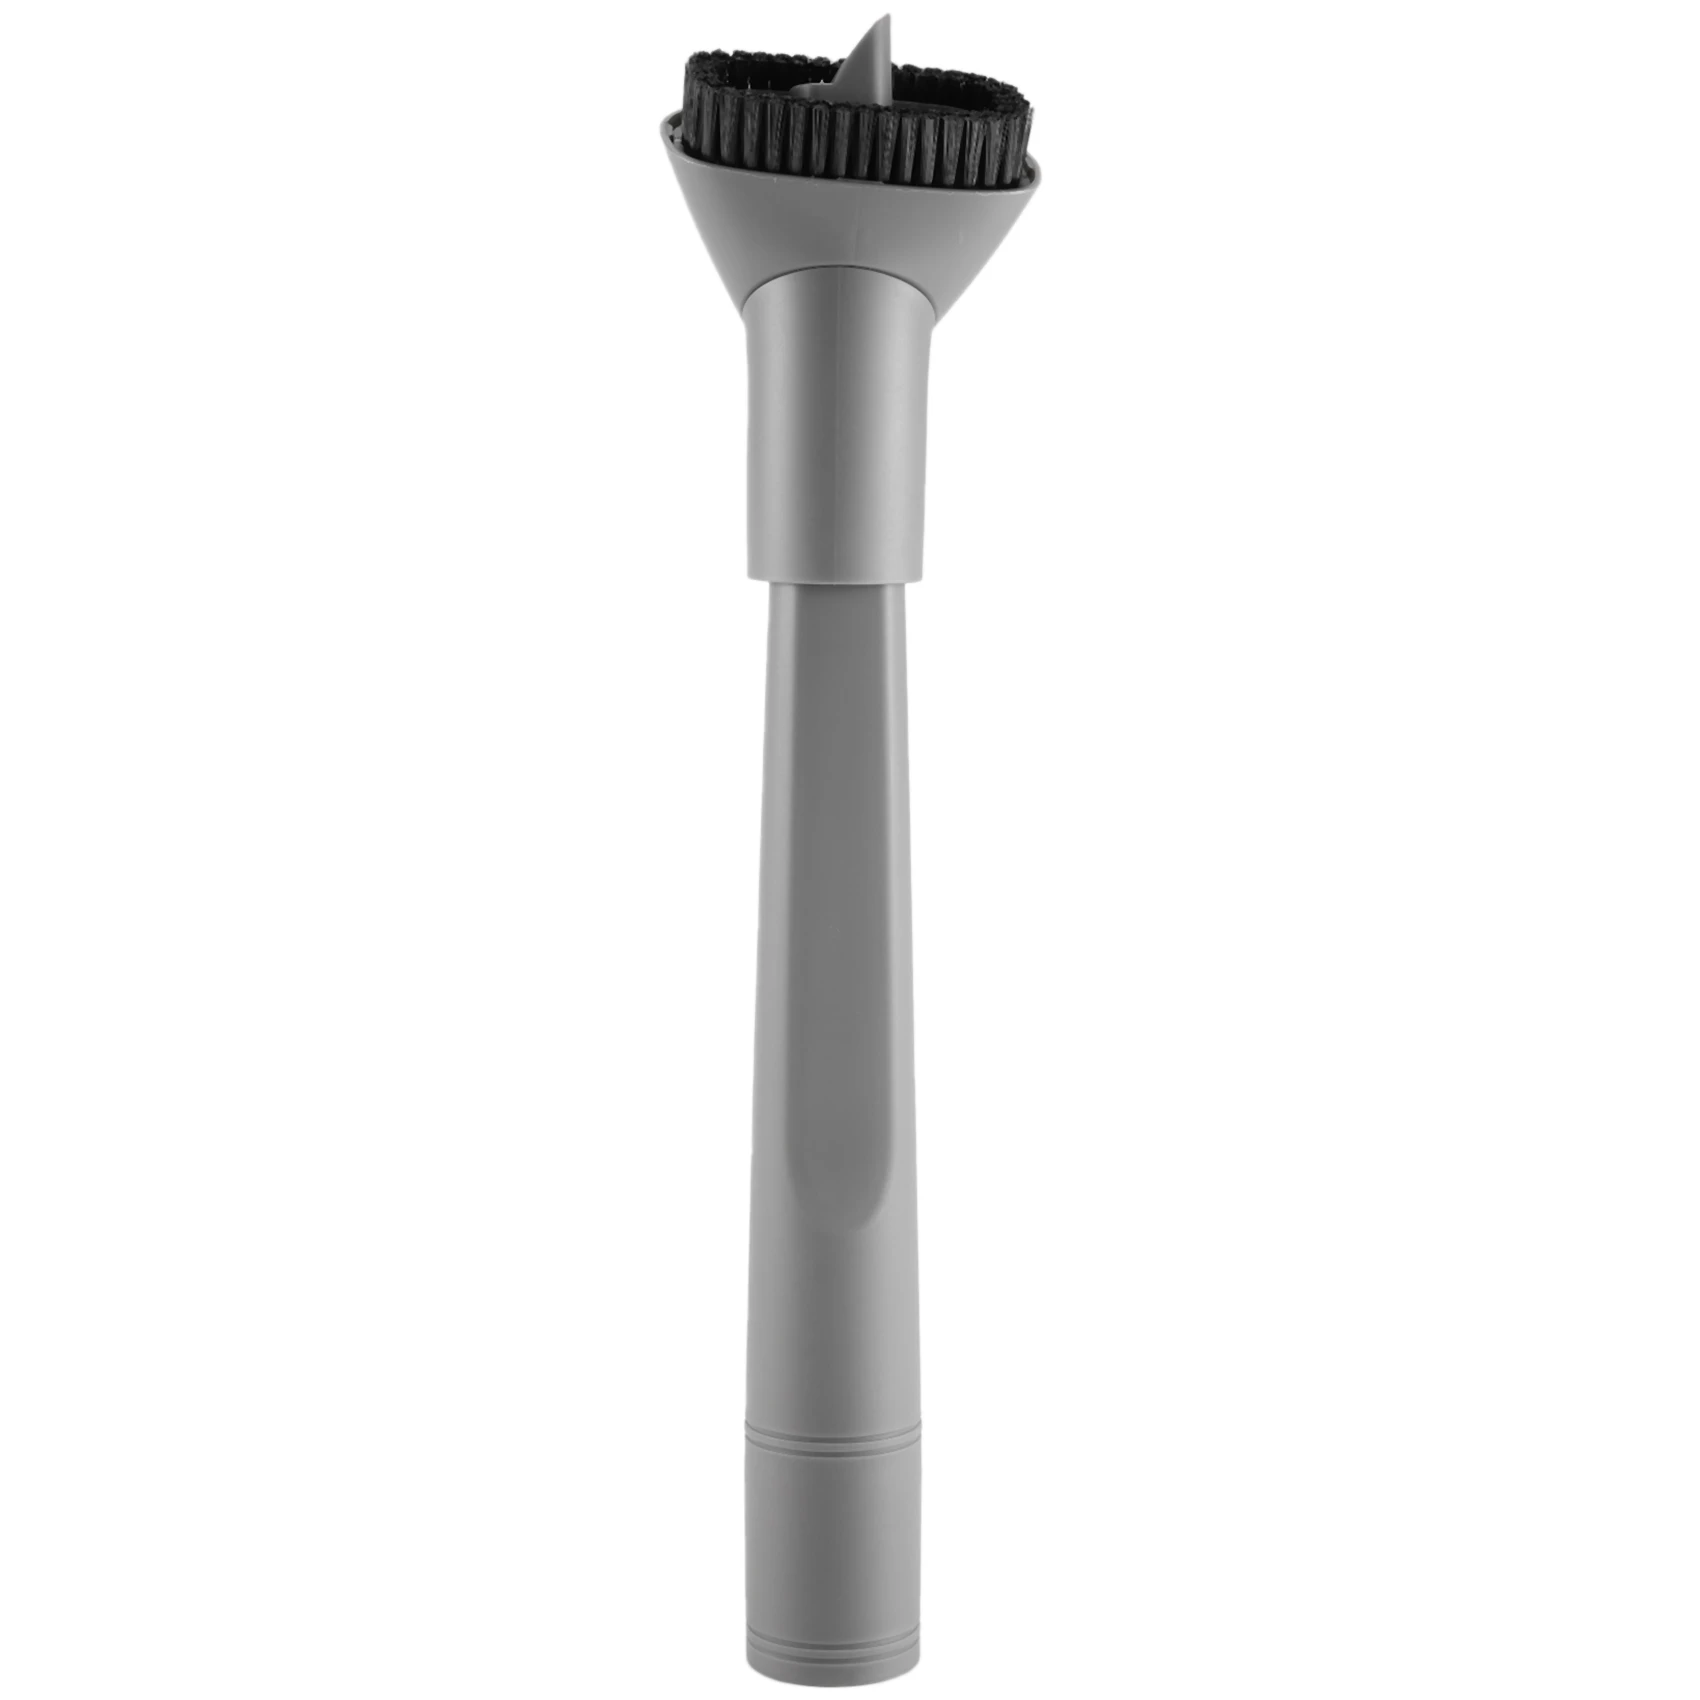 

Crevice Tool and Dust Brush for Shark Navigator Lift-Away Vacuum Cleaner, Fits Models NV350, NV352, NV355, NV356E, Compare to